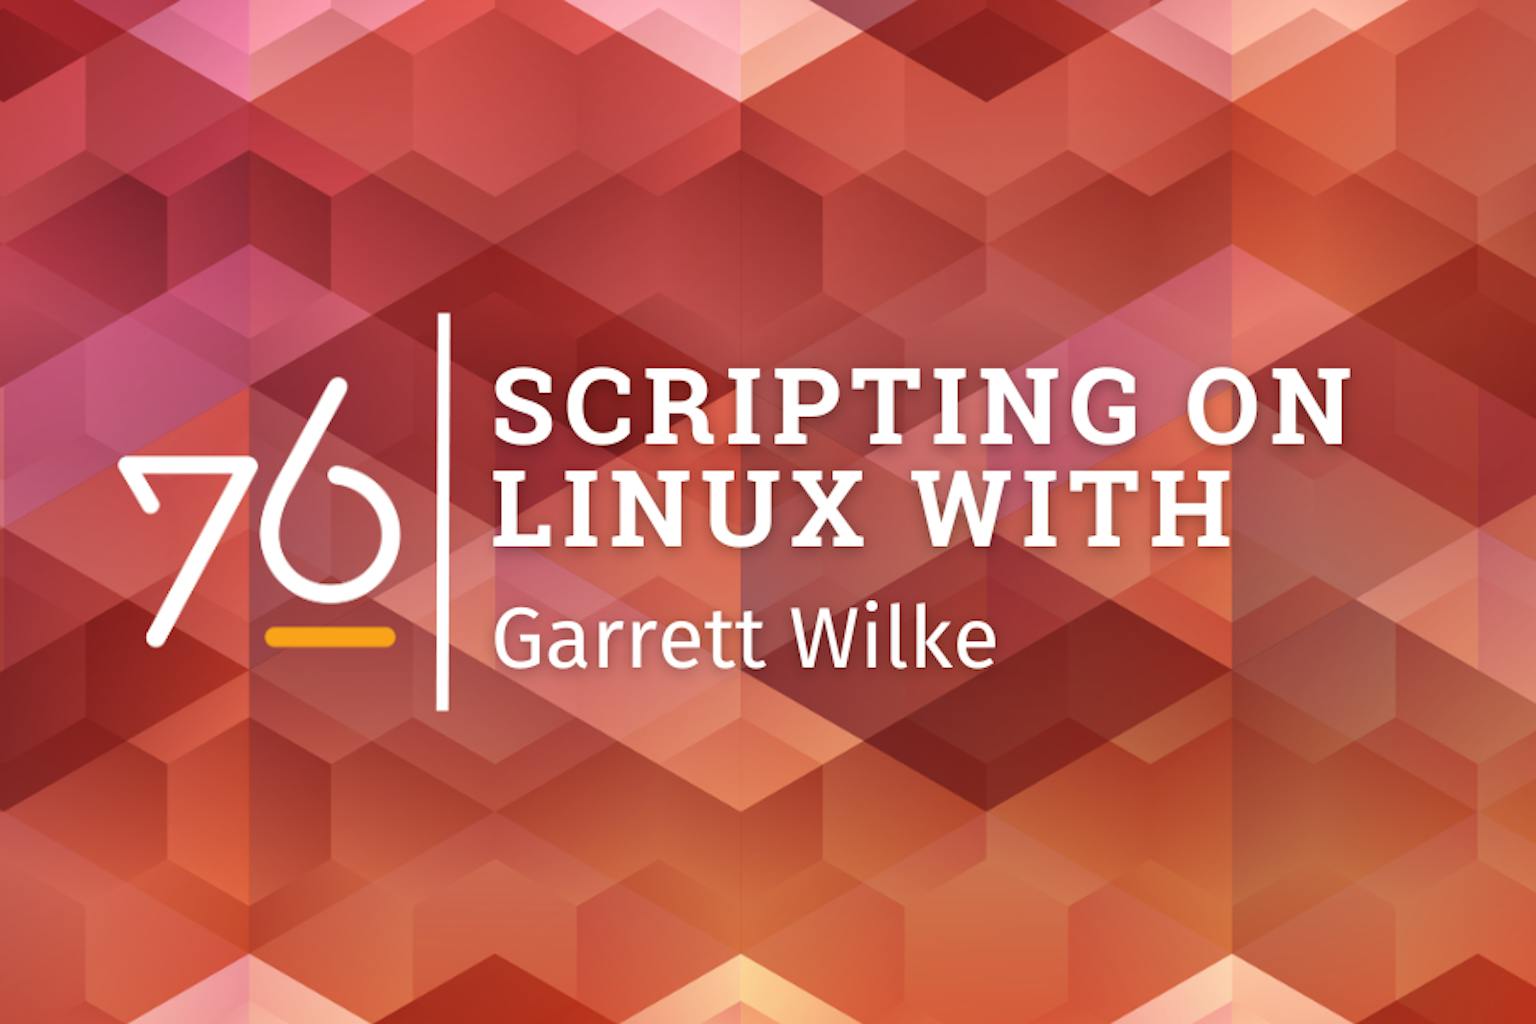 Reads Scripting on Linux with Garrett Wilke with red geometric background and a System76 logo